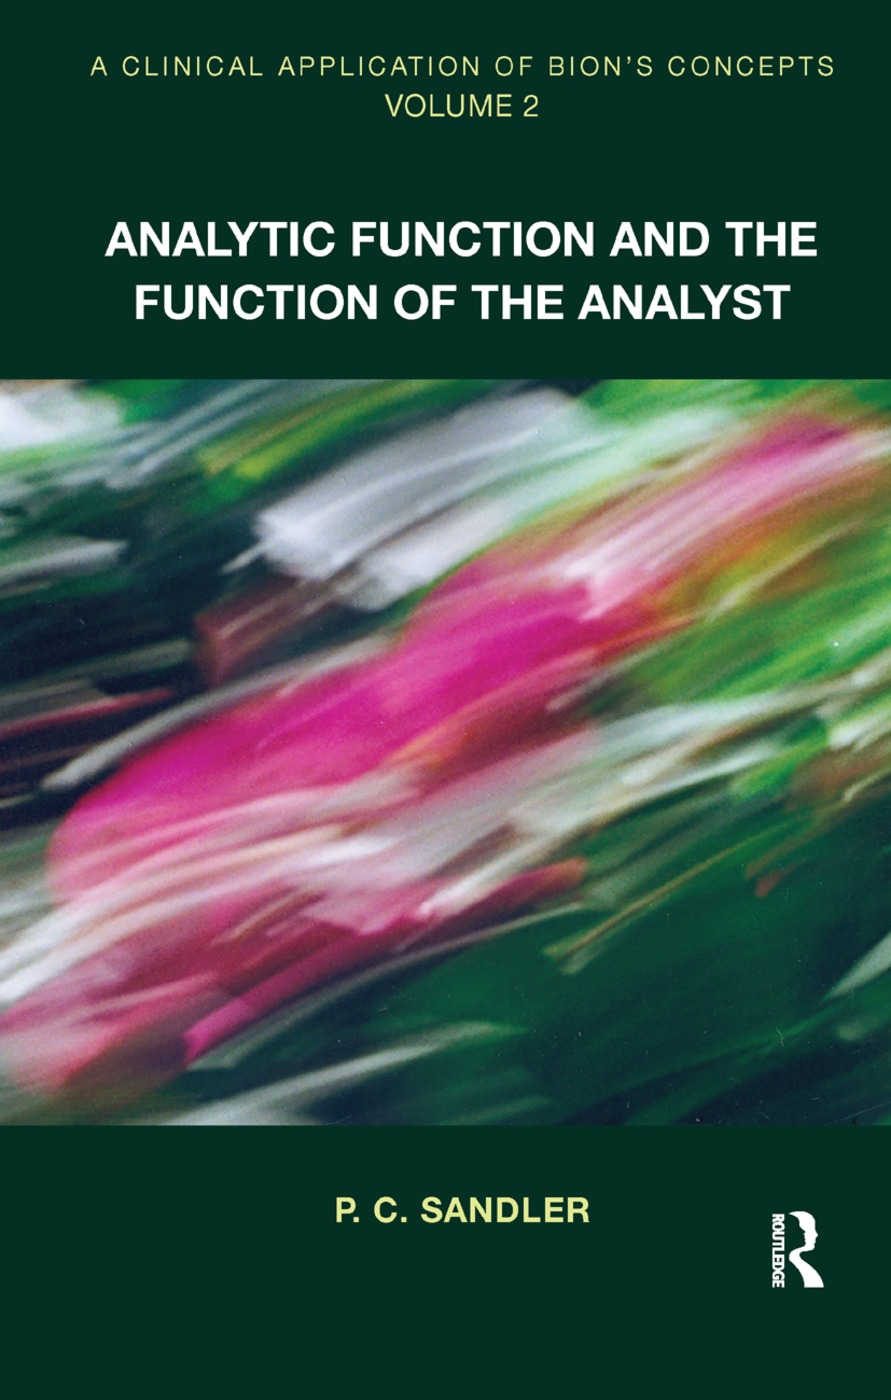 A Clinical Application of Bion’s Concepts: Analytic Function and the Function of the Analyst